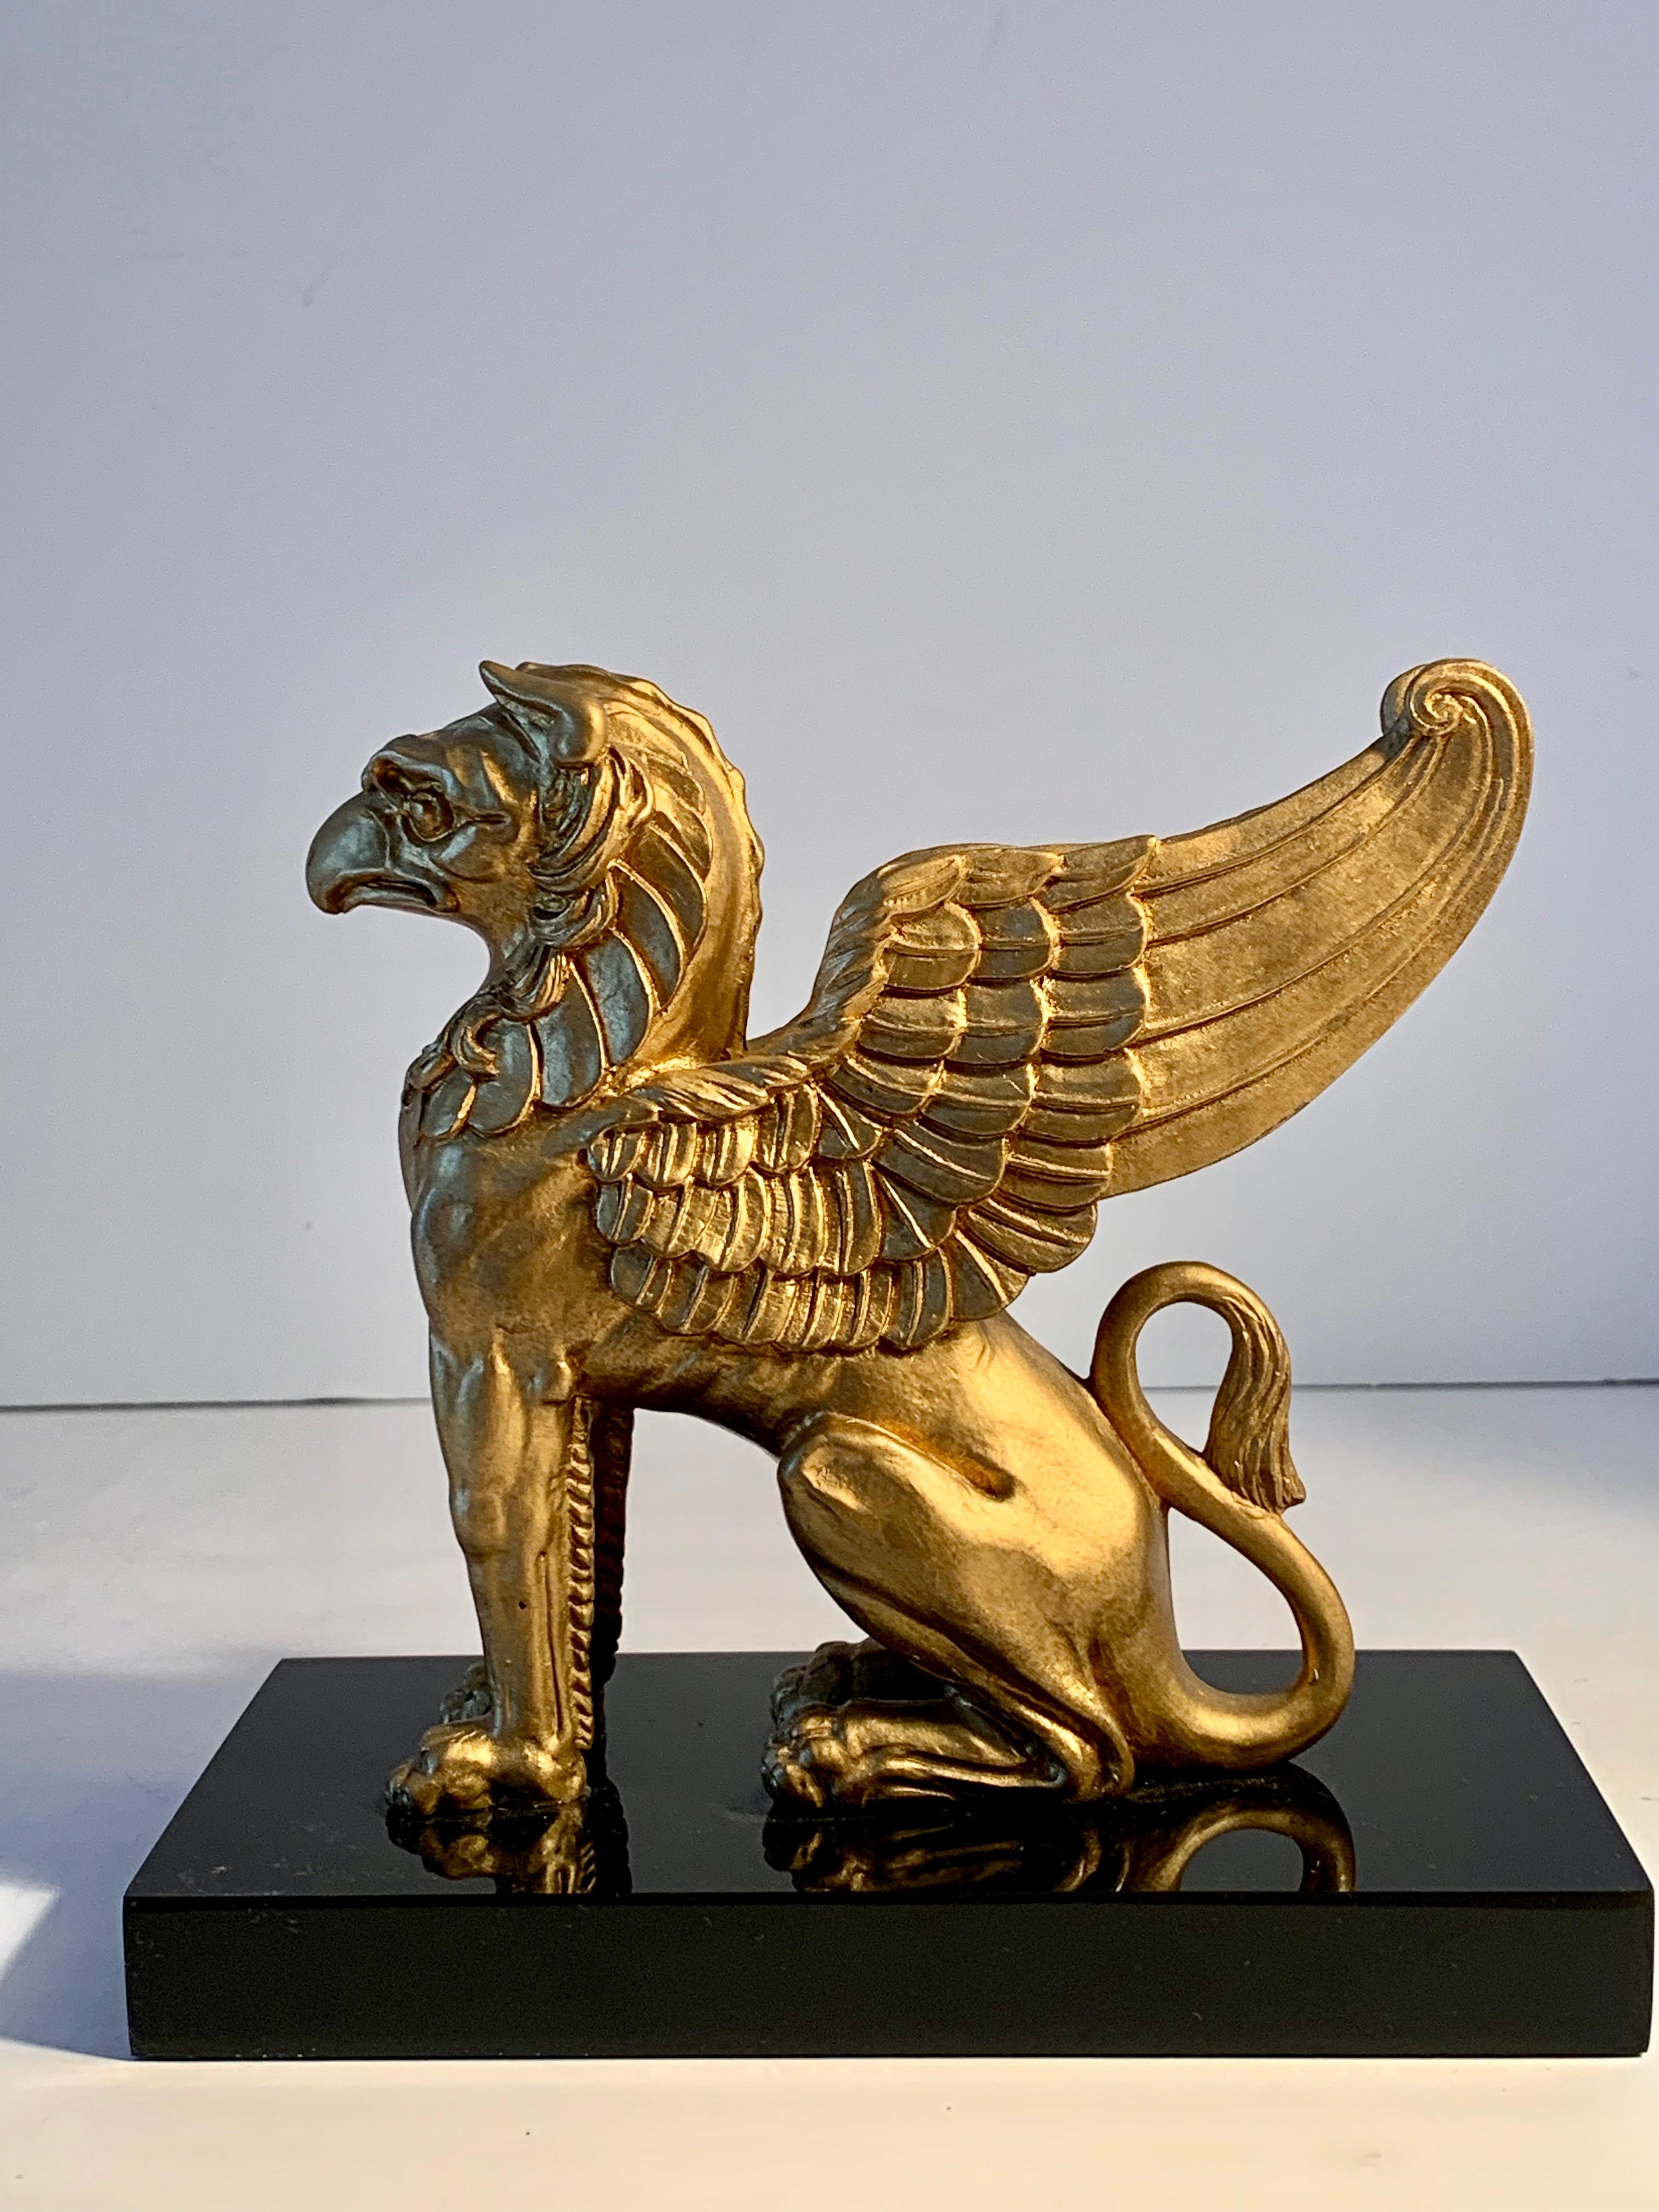 Composition gold Griffin on marble base - a stunning paper weight or decorative object / Sculpture. A very formidable Griffin atop a marble base, also a wonderful paper weight in the Library or Childs room.